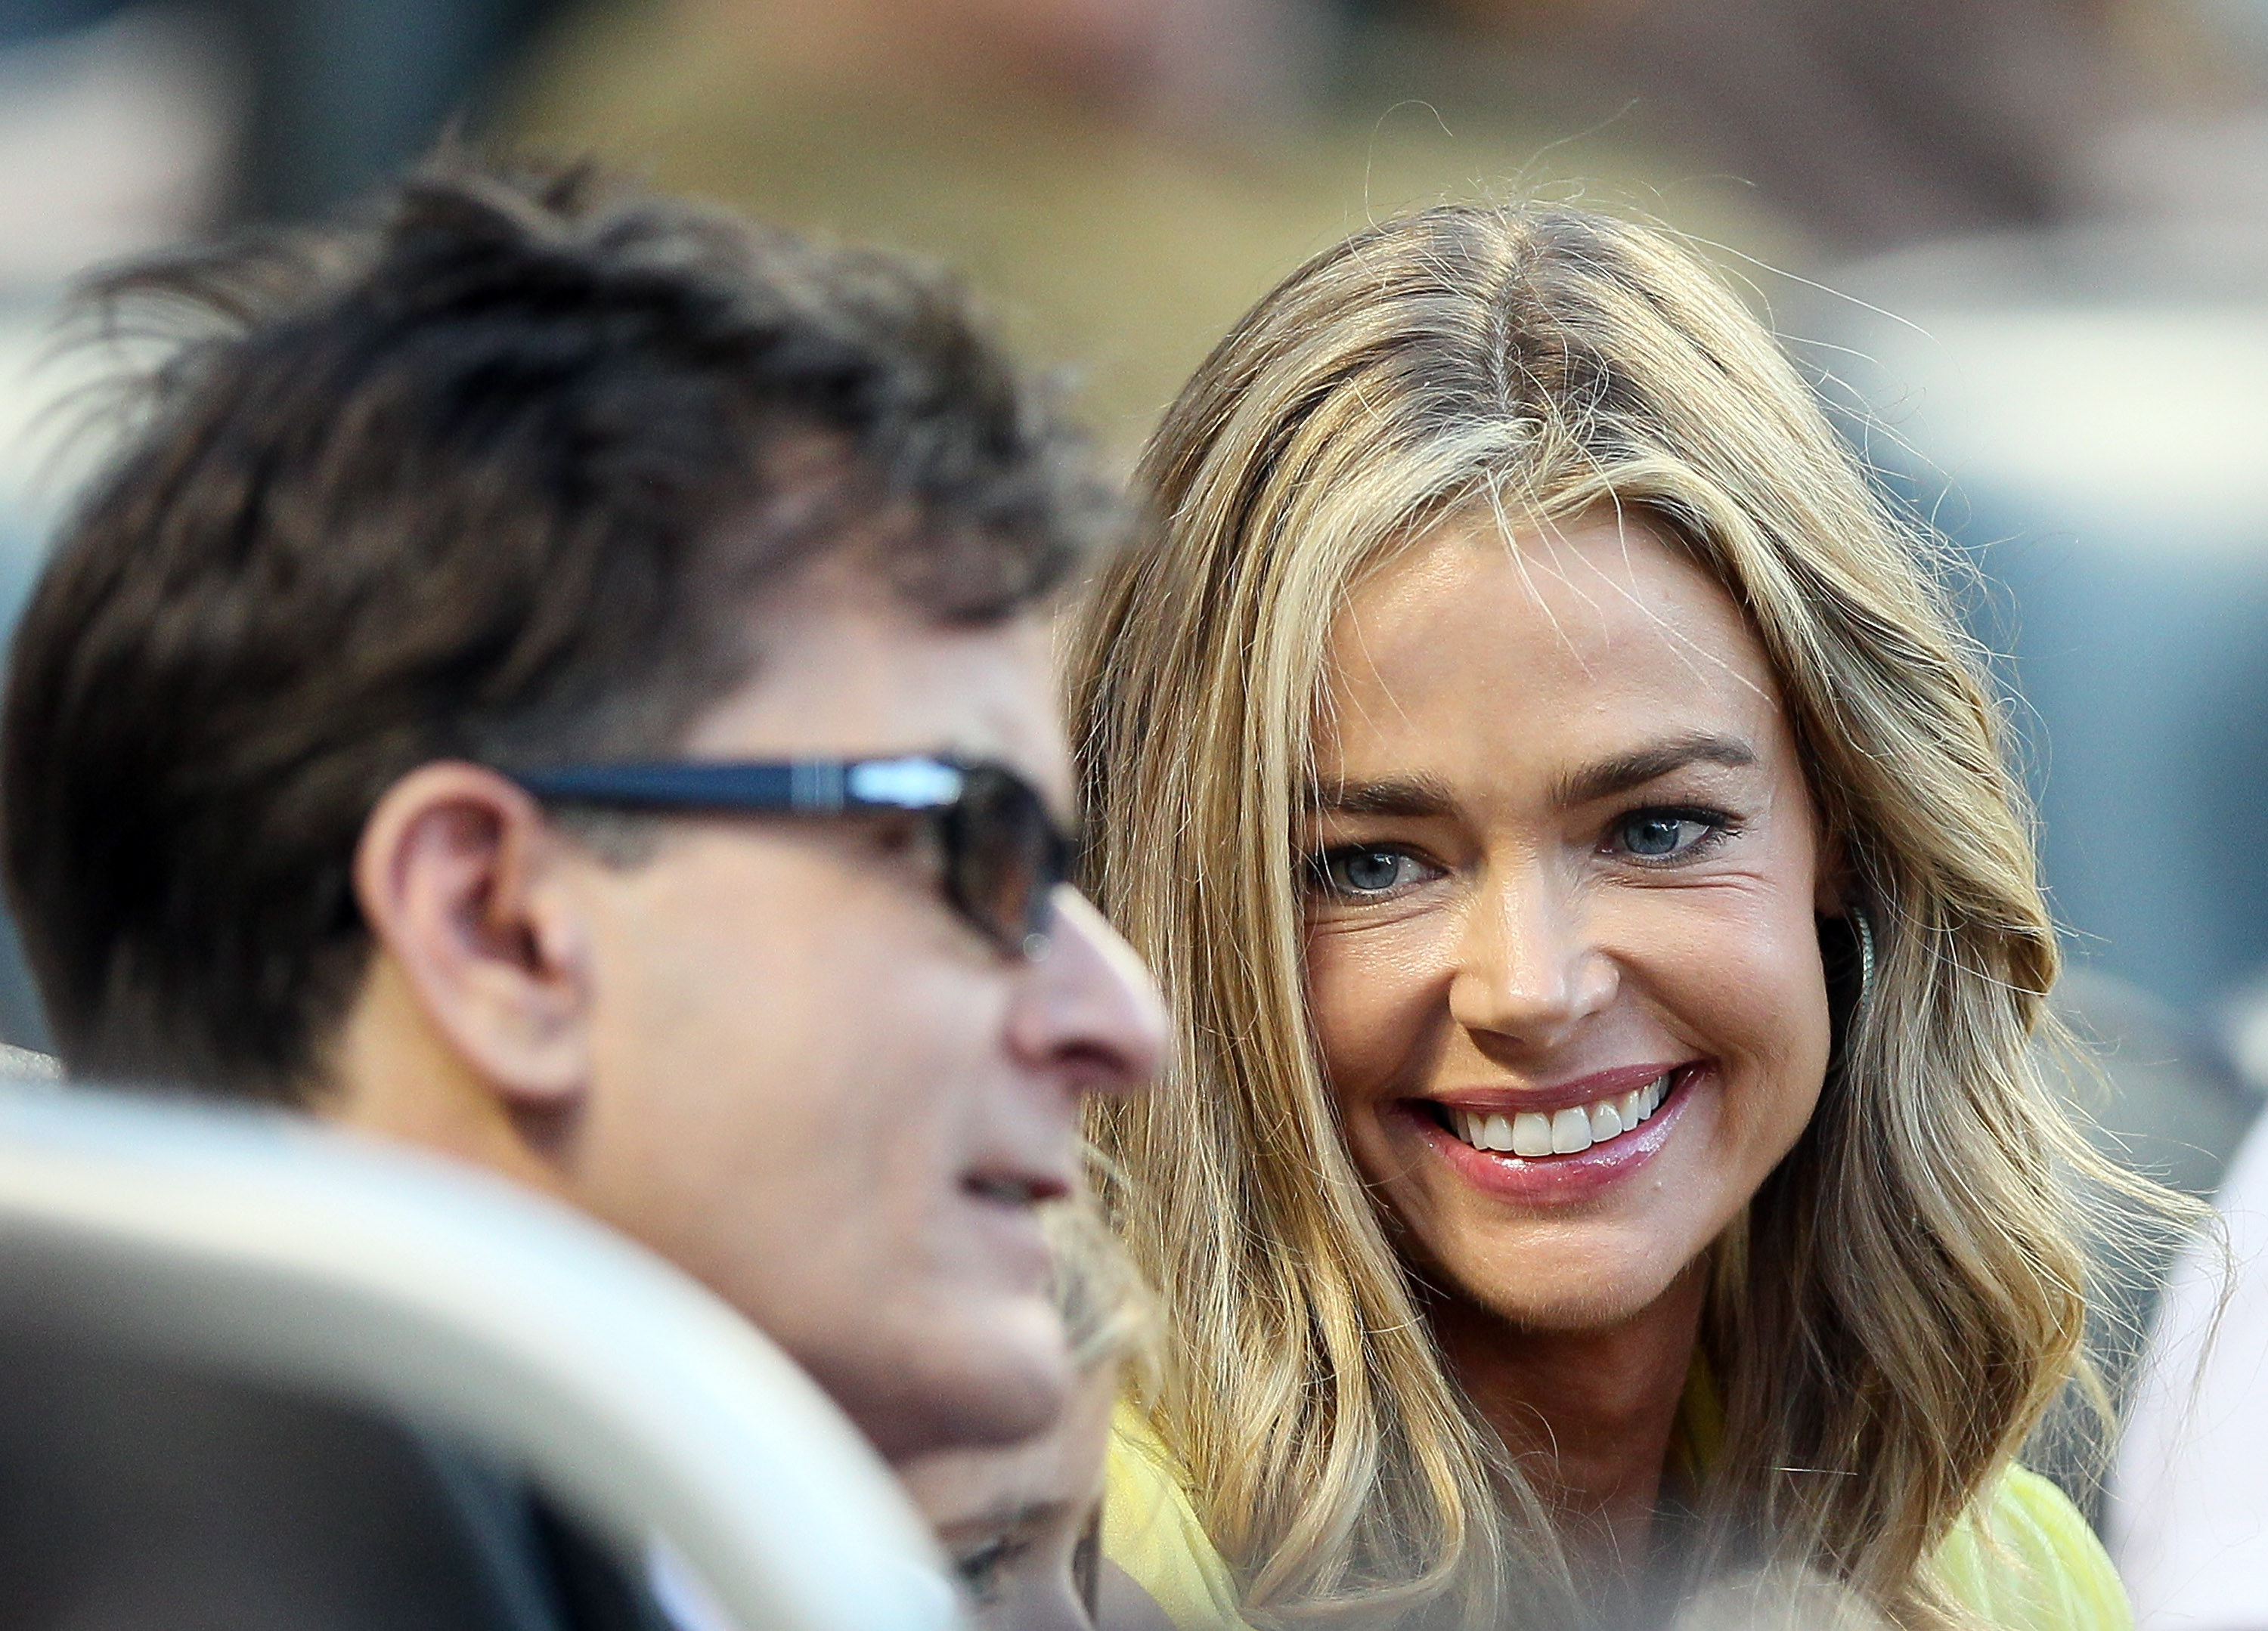 Charlie Sheen and Denise Richards in New York City on June 23, 2012 | Source: Getty Images